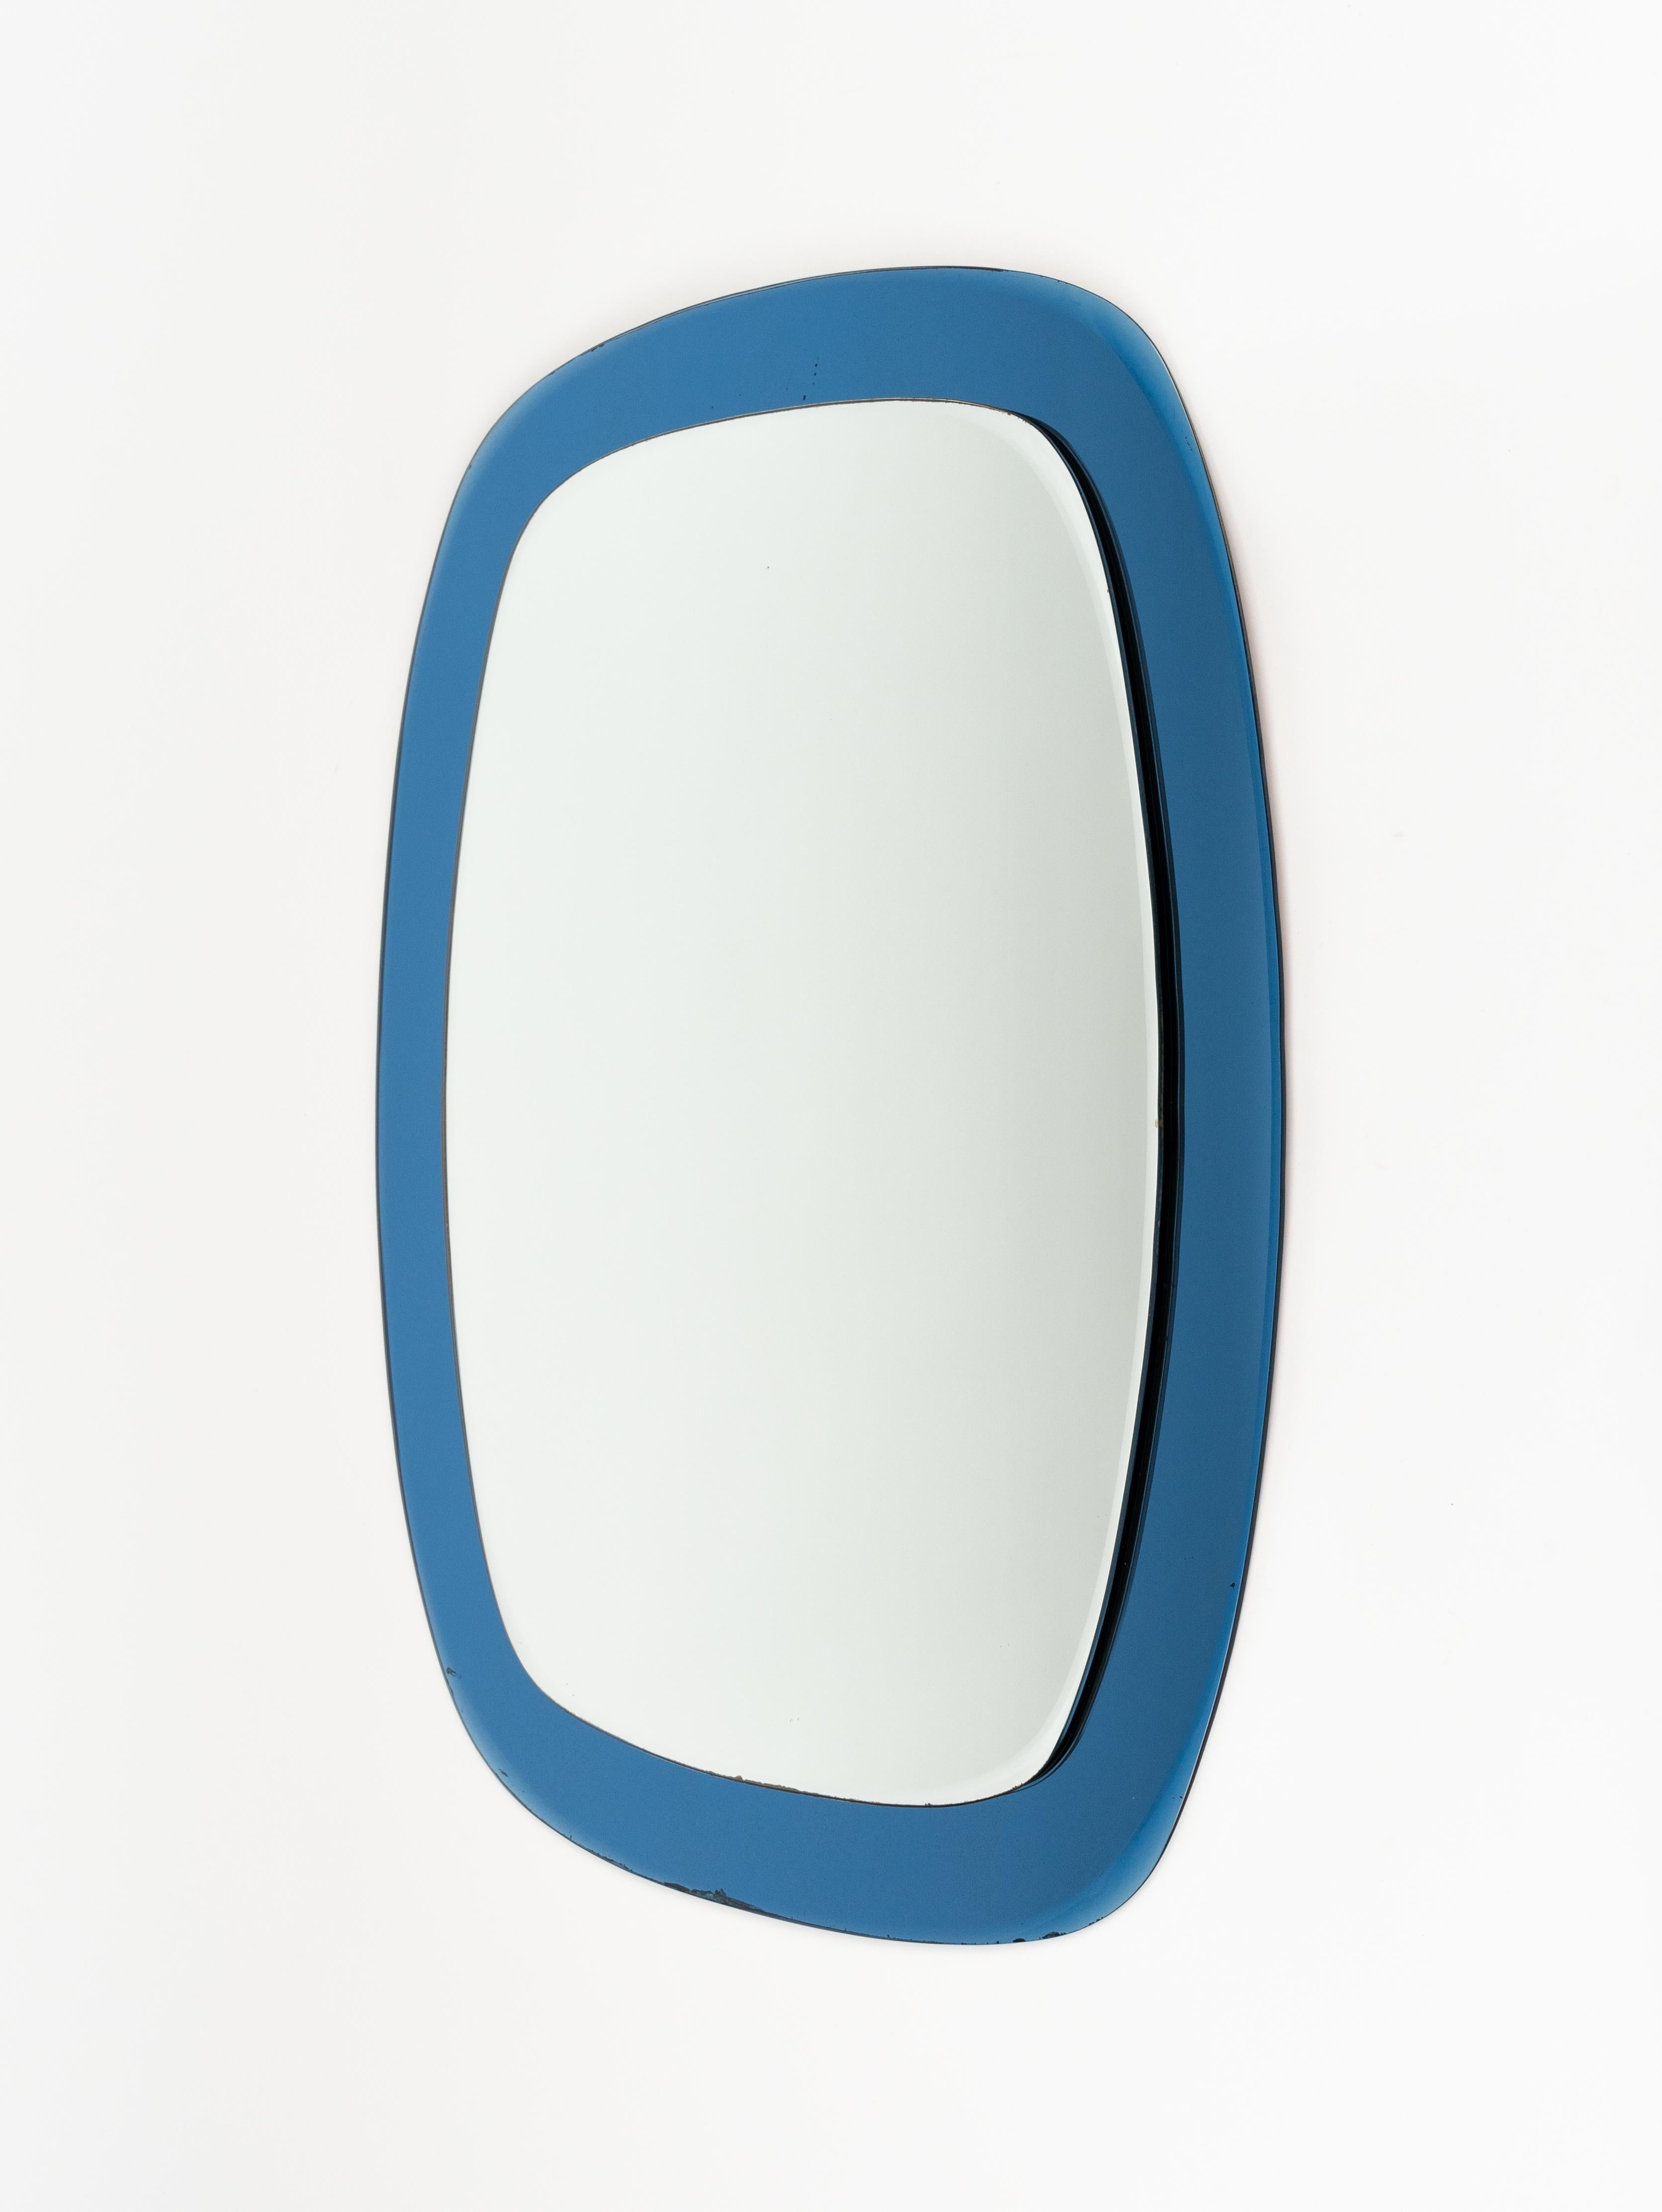 Midcentury Cristal Art Oval Wall Mirror with Blue Frame, Italy 1960s For Sale 4